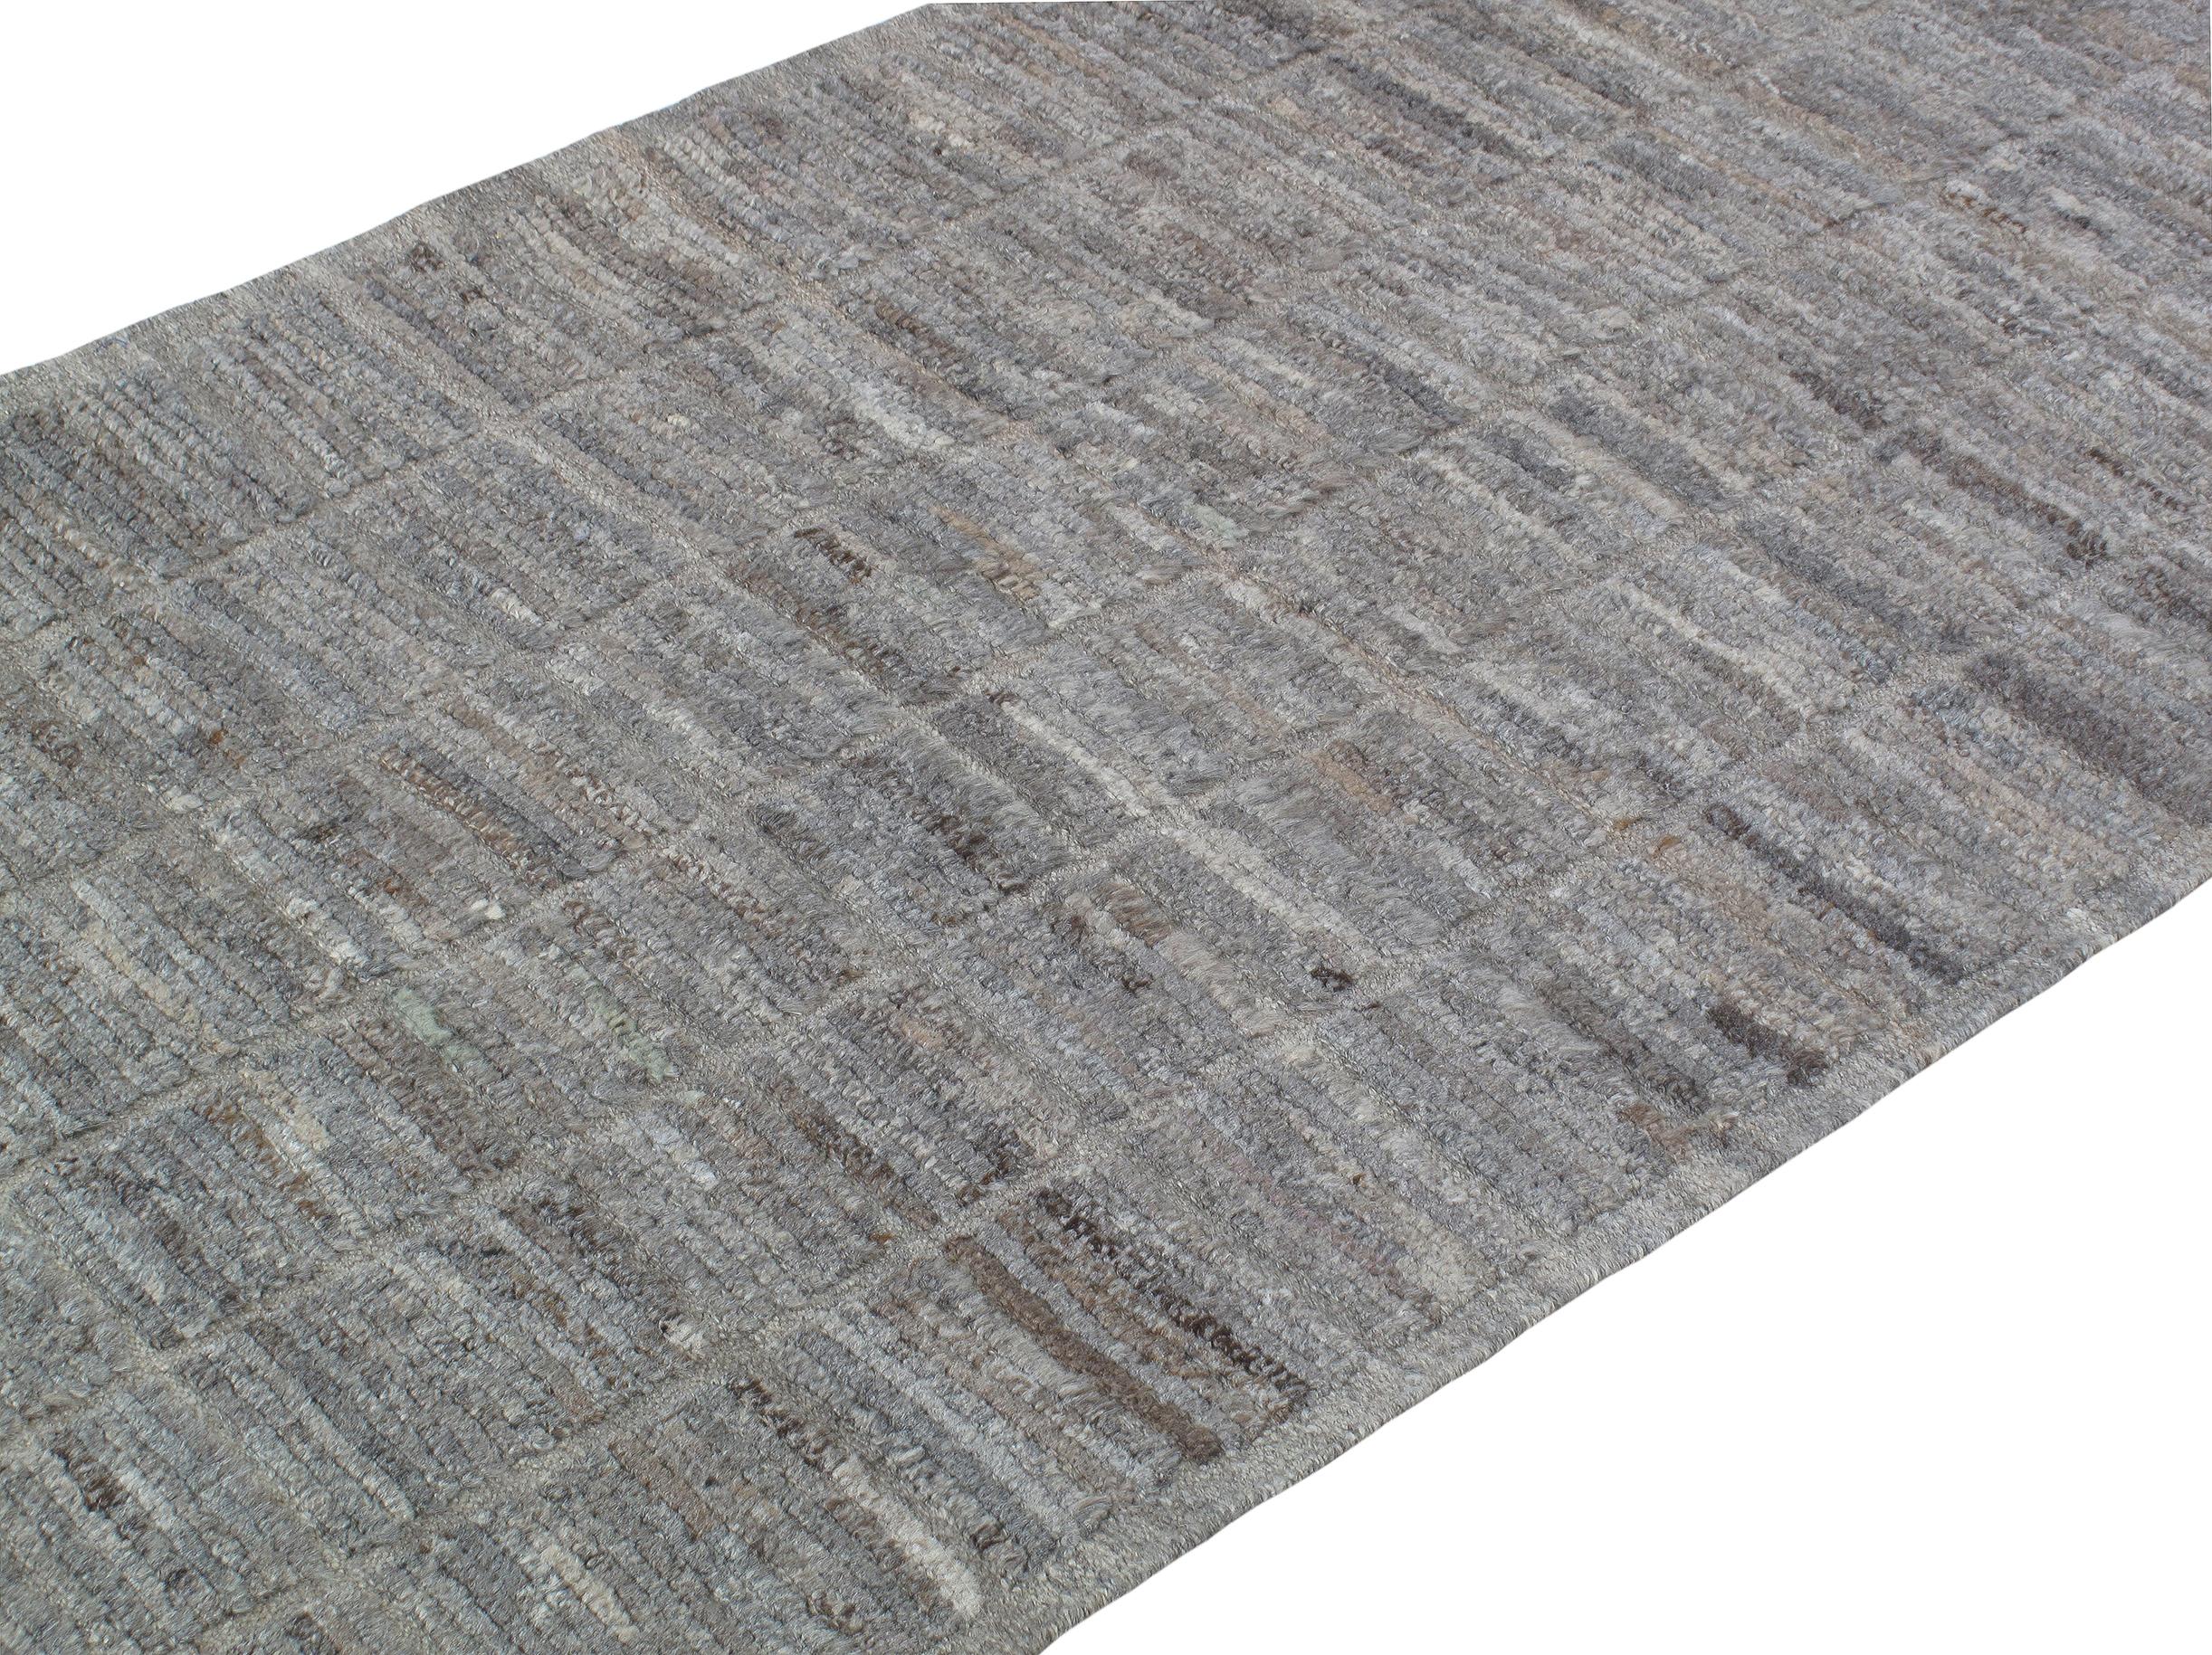 Our African runner  is hand-knotted, and made from the finest hand-carded, hand-spun naturally dyed wool. It has variations of grey, and natural wool.  It features a beautiful pile with a subtle design that gives it more of a textural look.  It